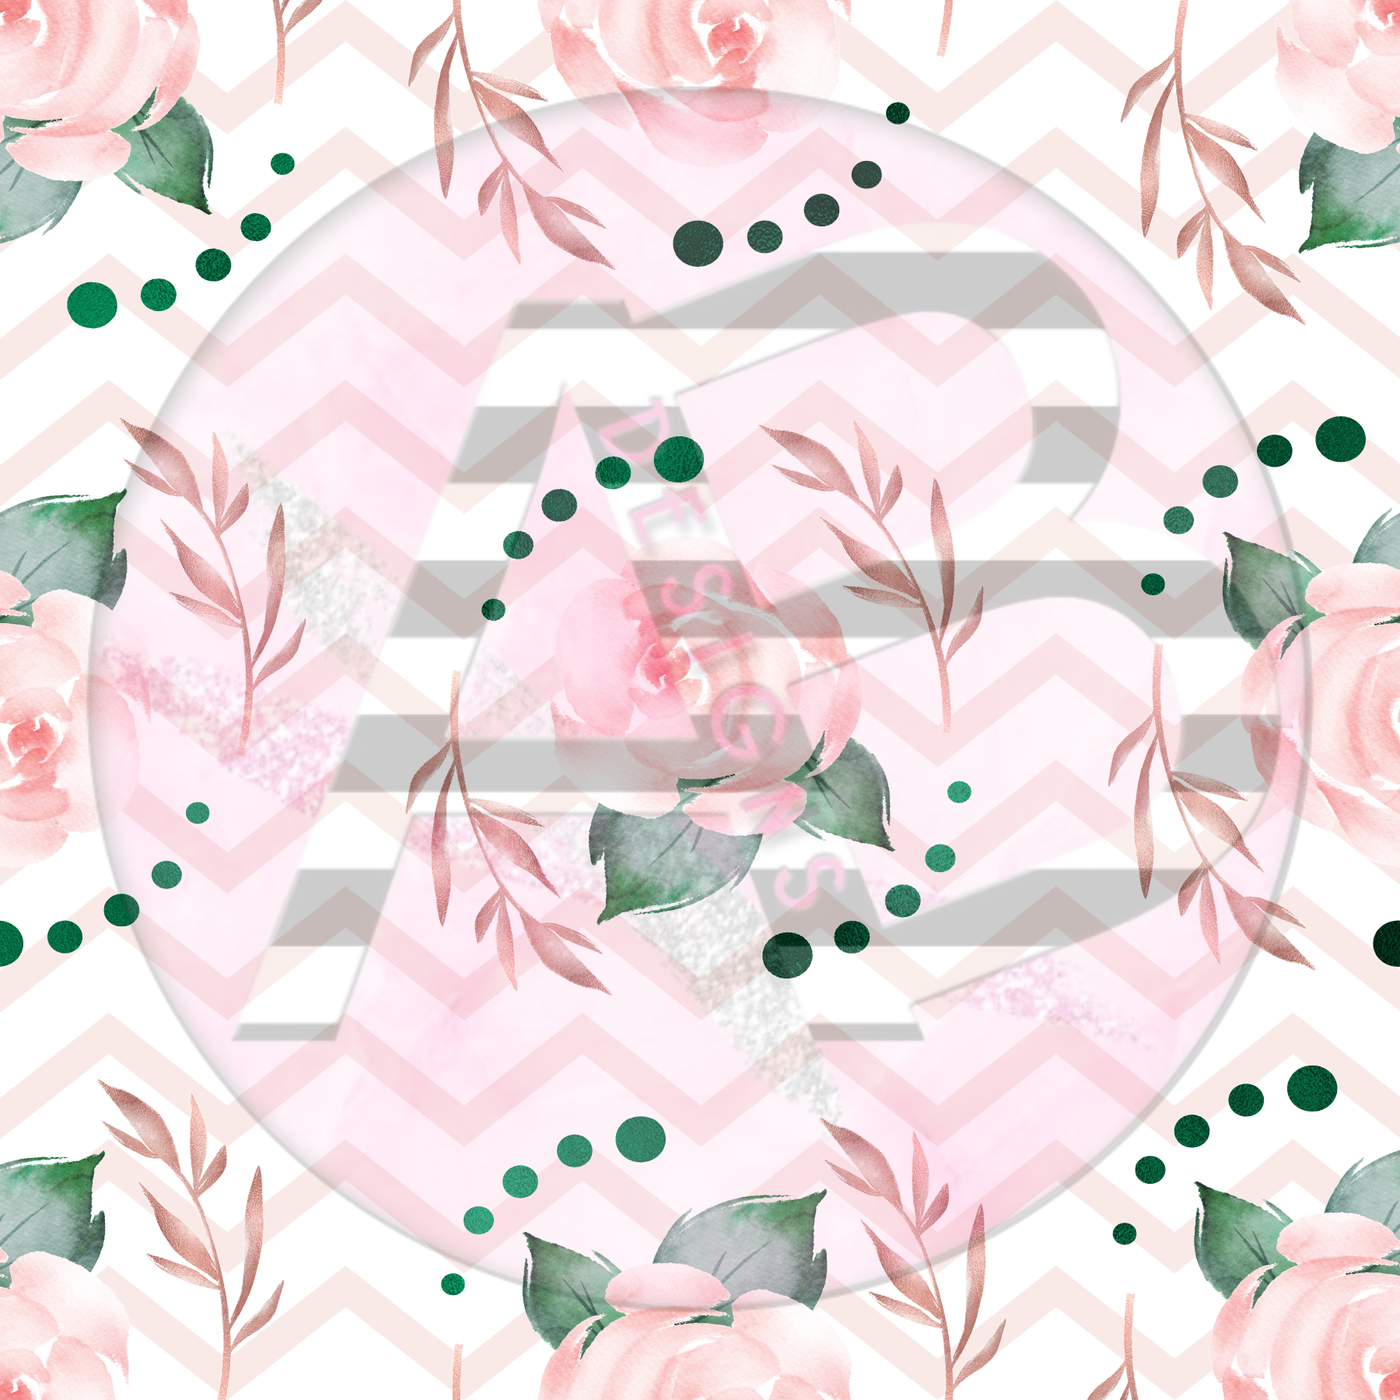 Adhesive Patterned Vinyl - Blush and Emerald Floral 05